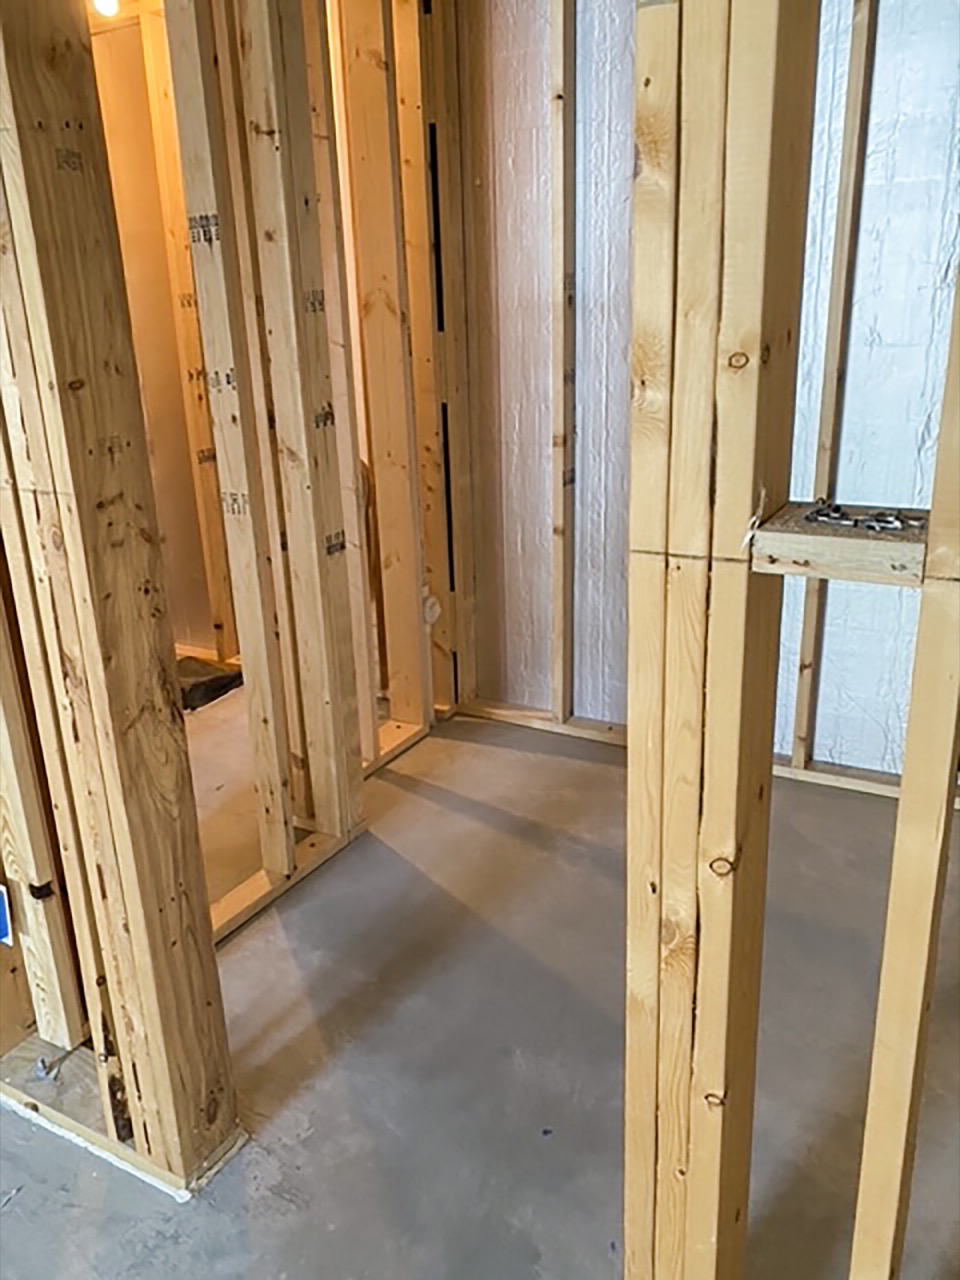 Wall framing during a House Lift renovation at a home in the Twin Cities